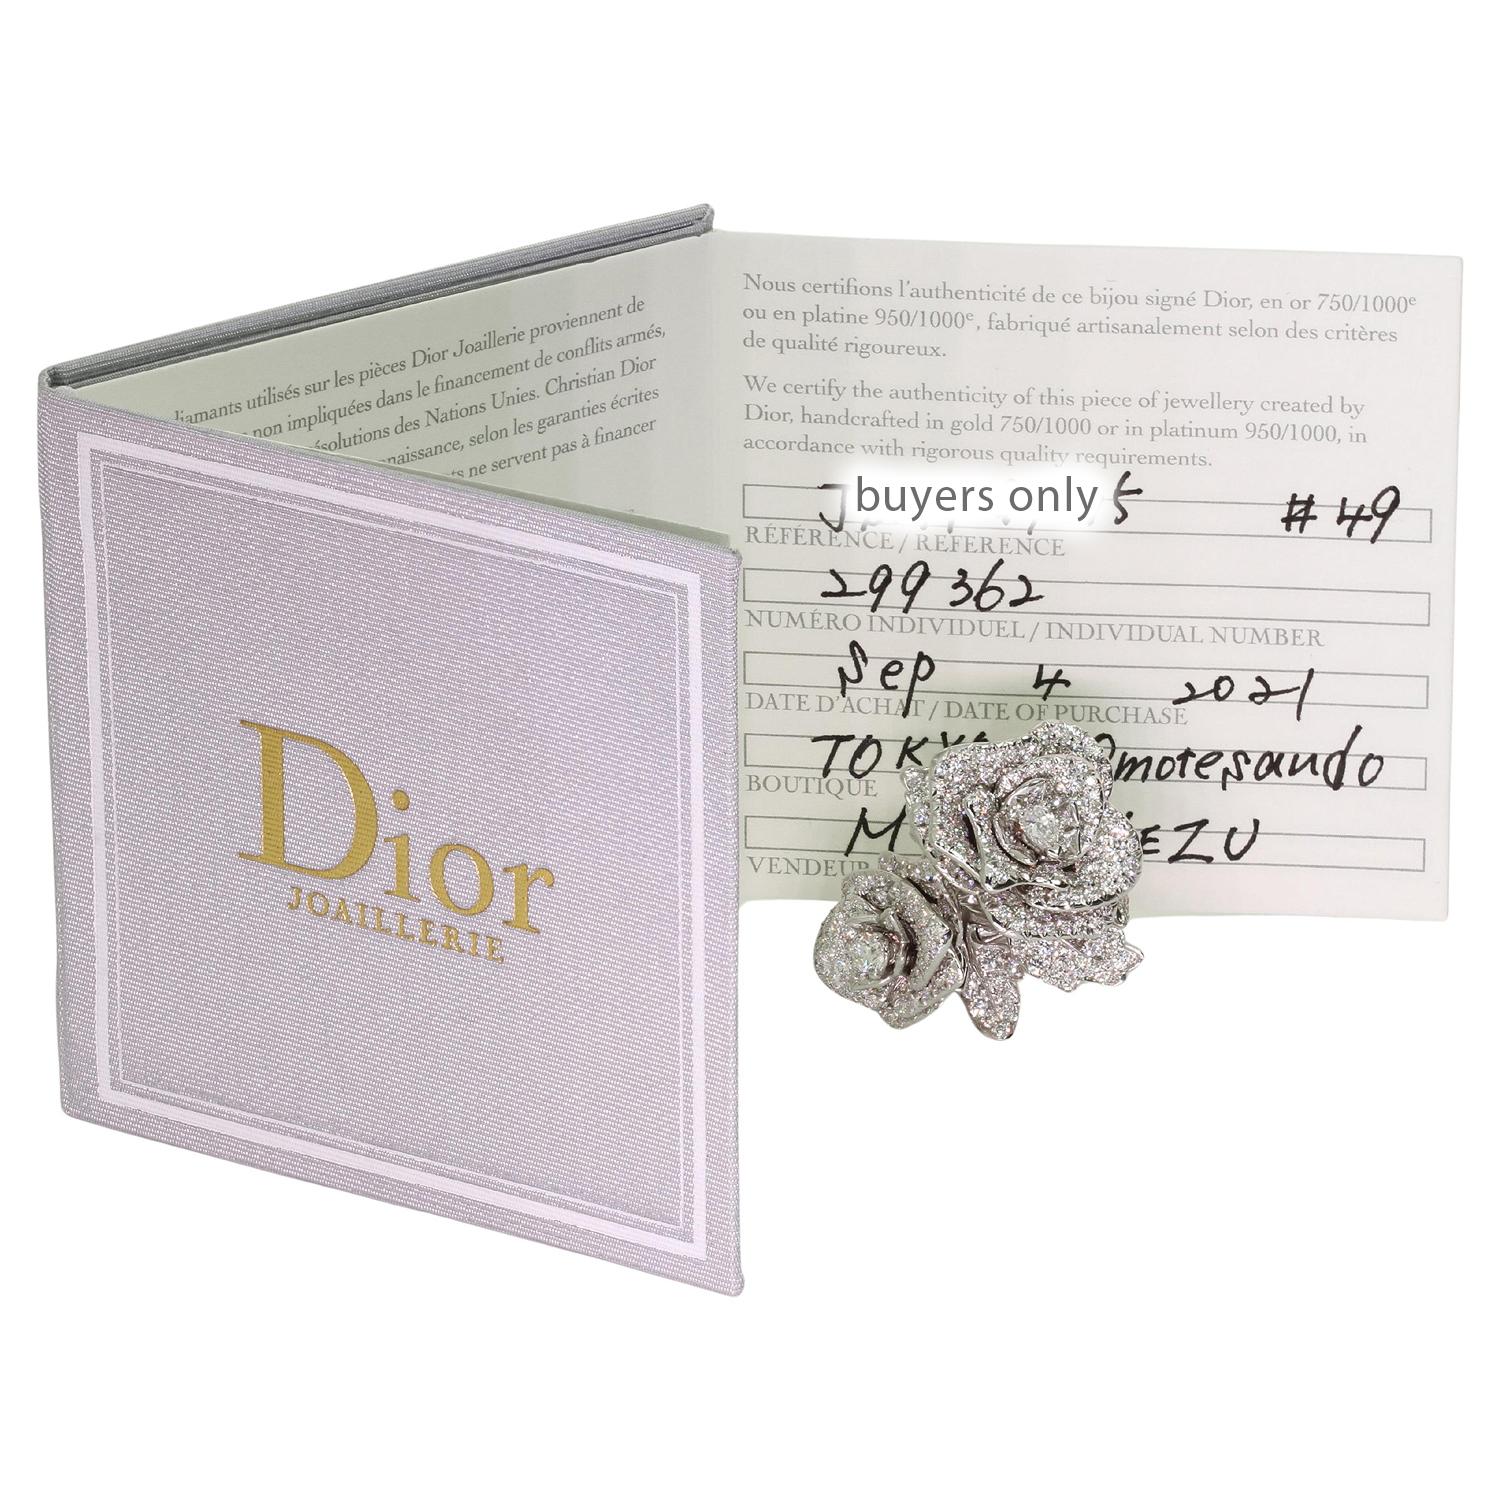 This magnificent Christian Dior ring was designed by Victoire de Castellane and features two rose flowers crafted in 18k white gold set and with round brilliant F-G VVS1-VVS2 diamonds weighing an estimated 3.87 carats. The Rose Dior Bagatelle